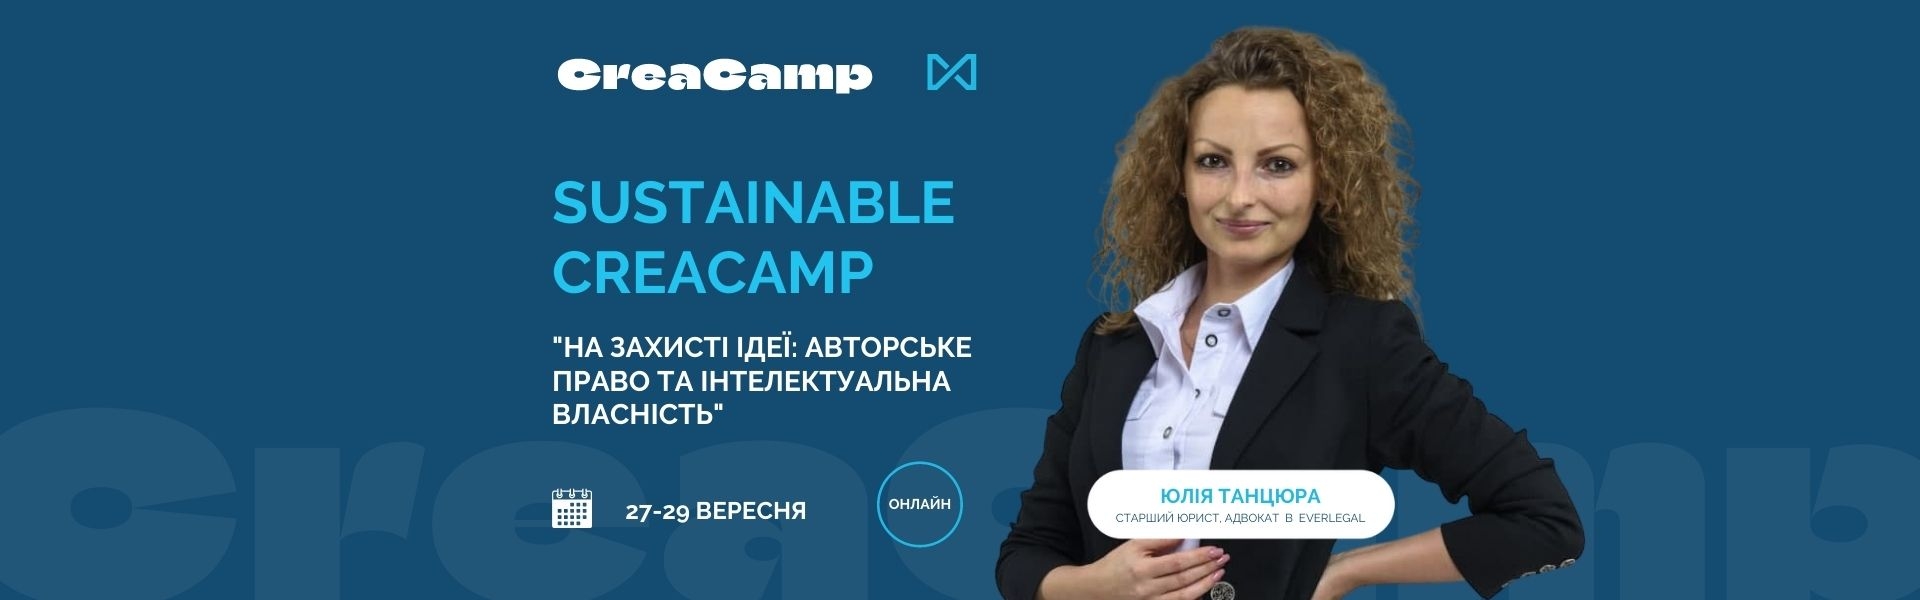 EVERLEGAL invites you to Sustainable CreaCamp!